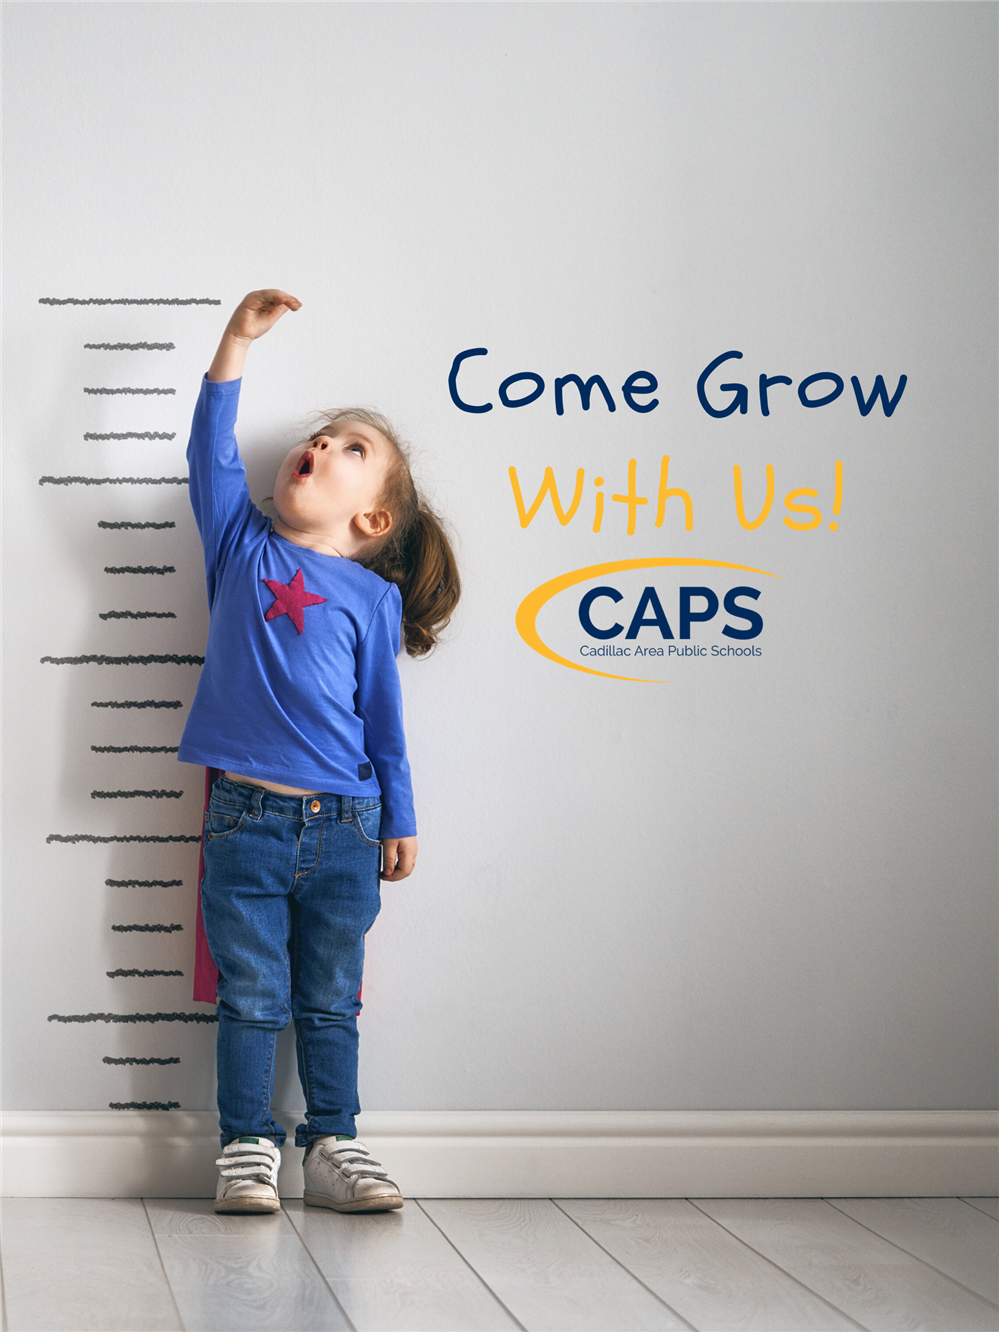 Come Grow With Ua CAPS Cadillac Area Public Schools with a pre-school student measuring herself on a wall.